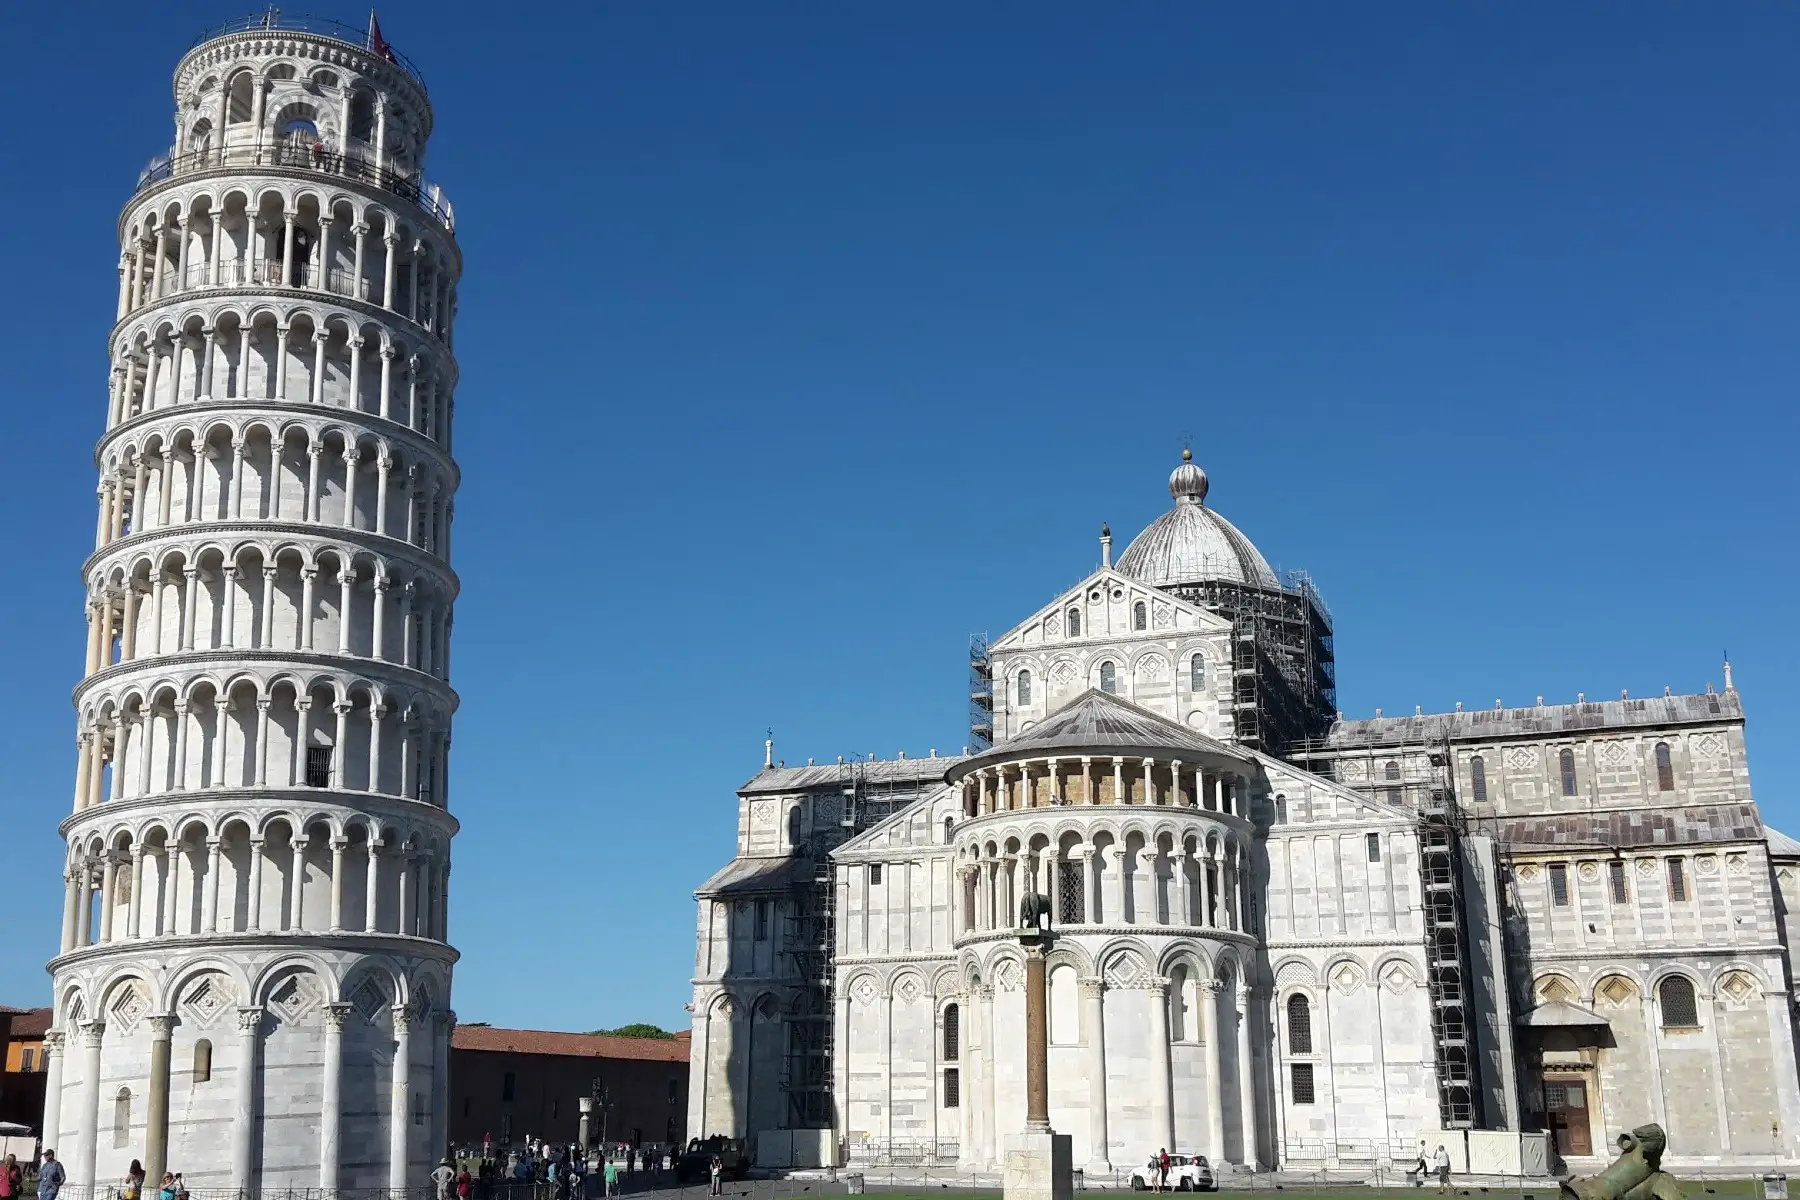 The Leaning Tower of Pisa and Pisa Cathedral in Tuscany, Italy 